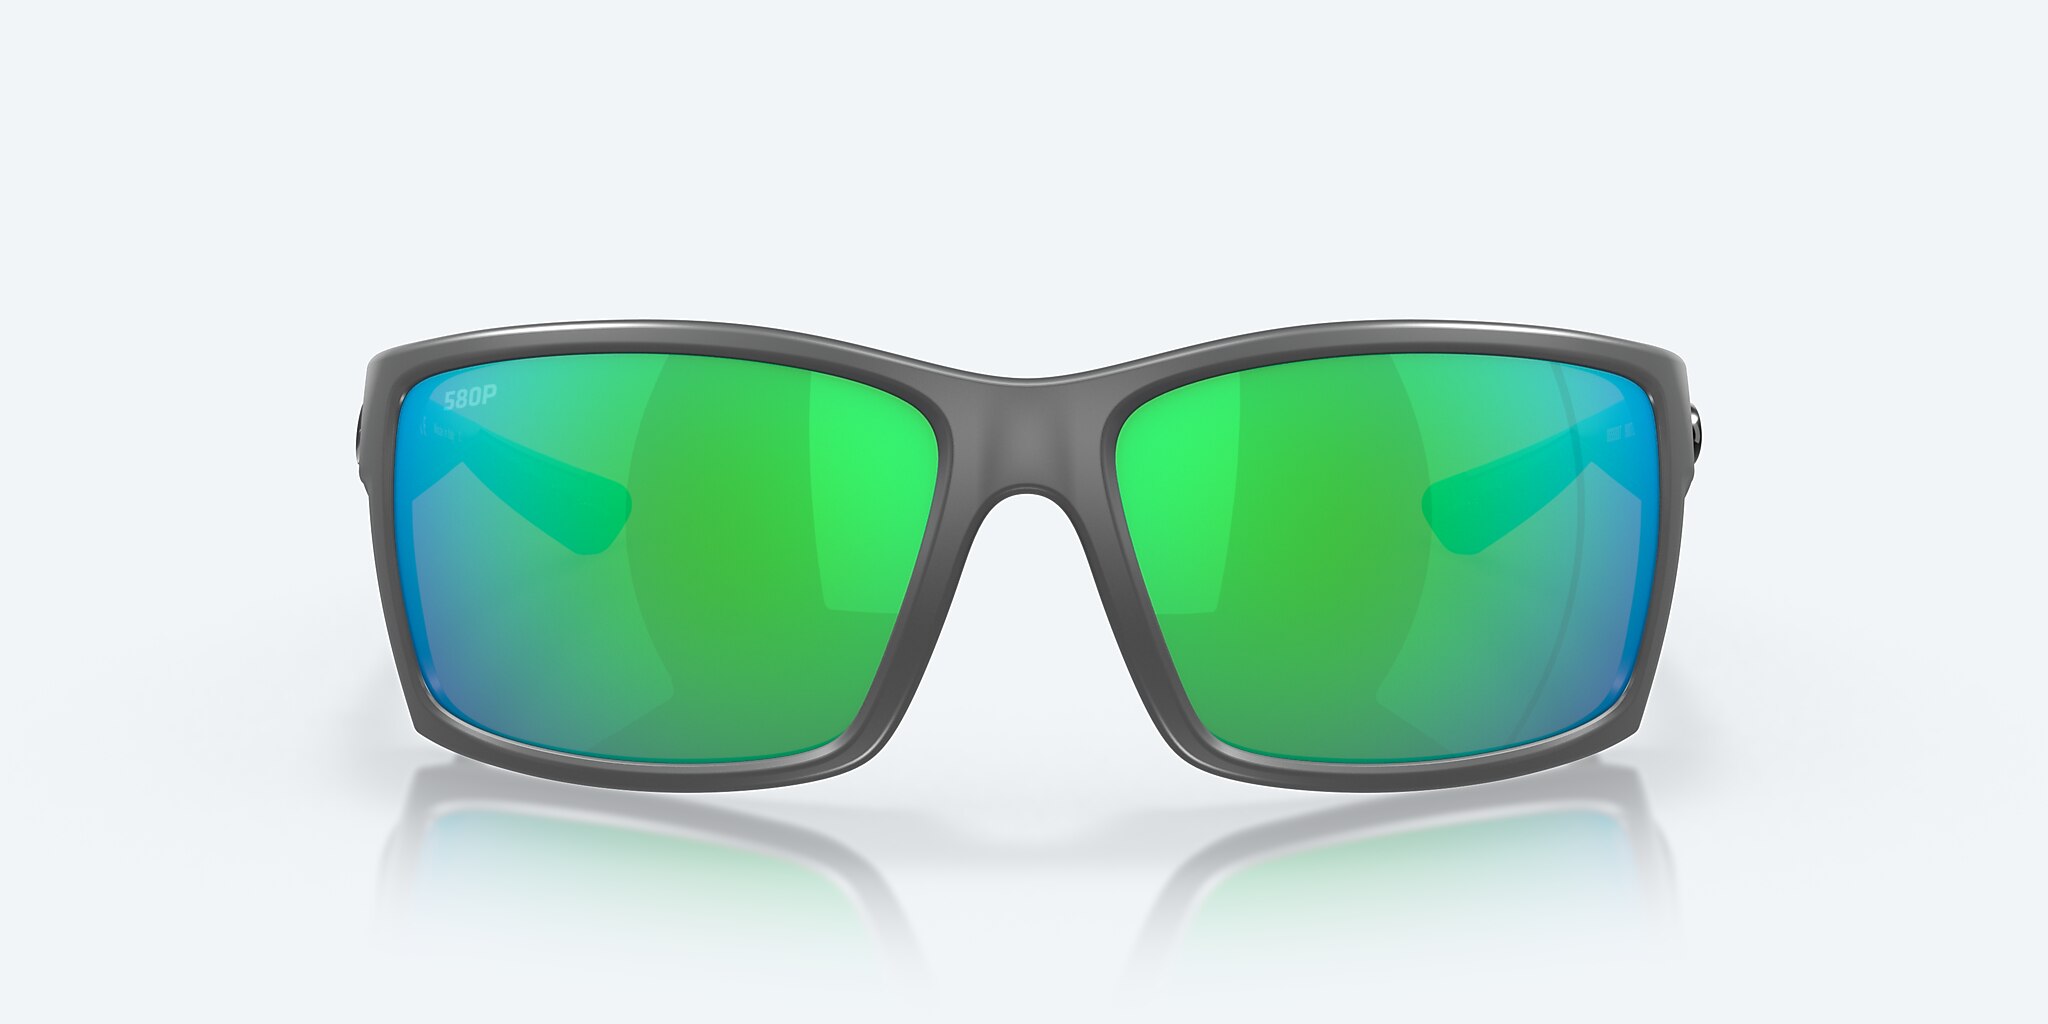 CORRIGAN BIO-BASED LIMITED Sunglasses in Transparent Dark Blue and Green -  RB4397